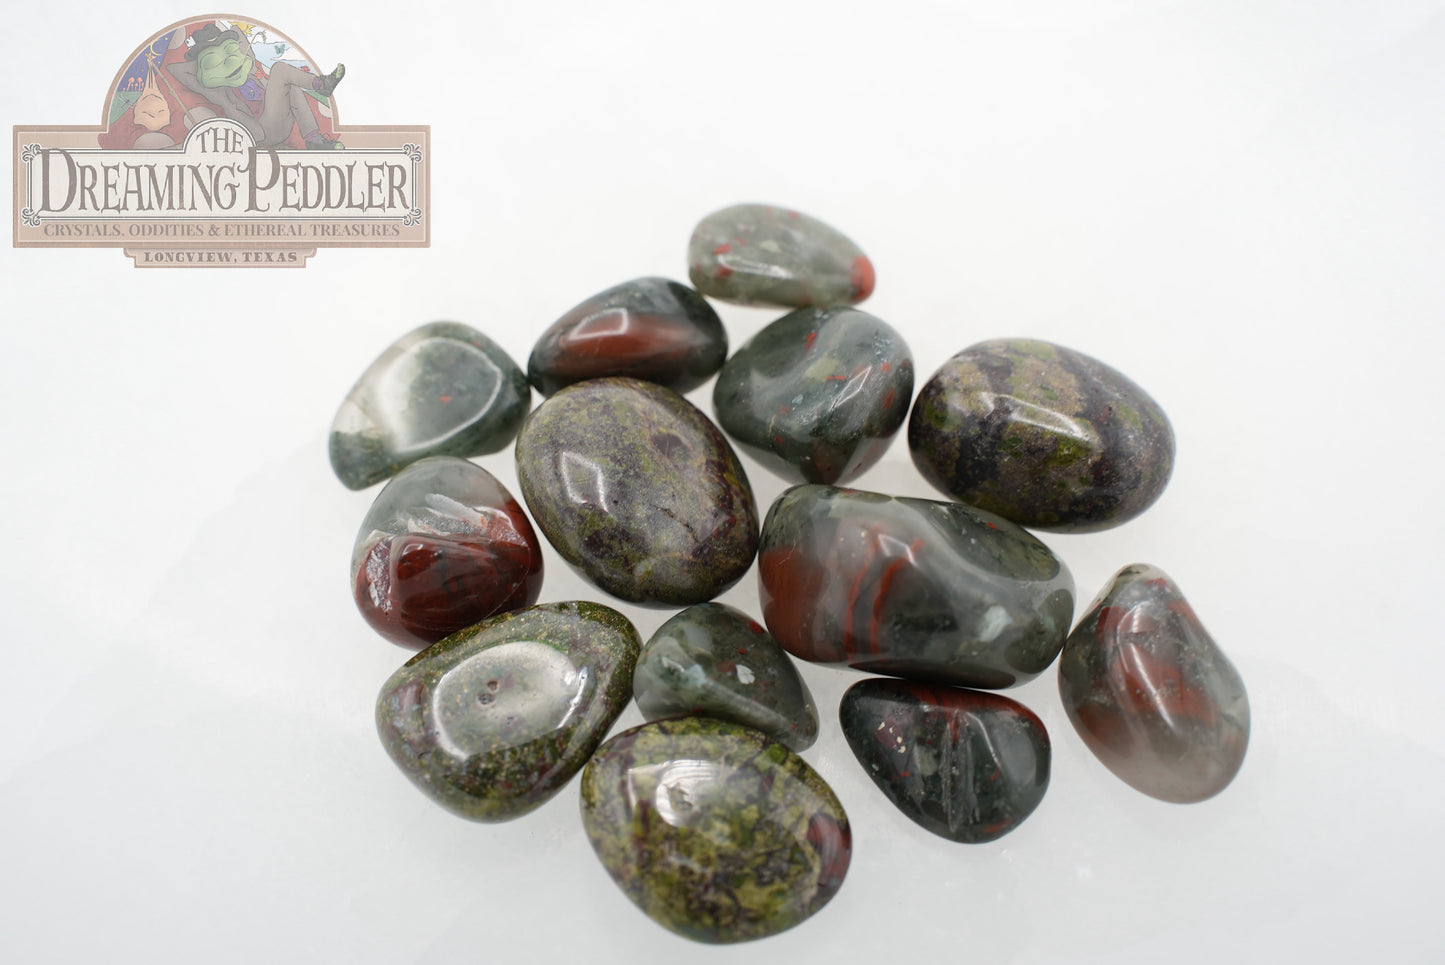 Natural, Hand-Selected Bloodstone Tumbled Stone Individual Pieces